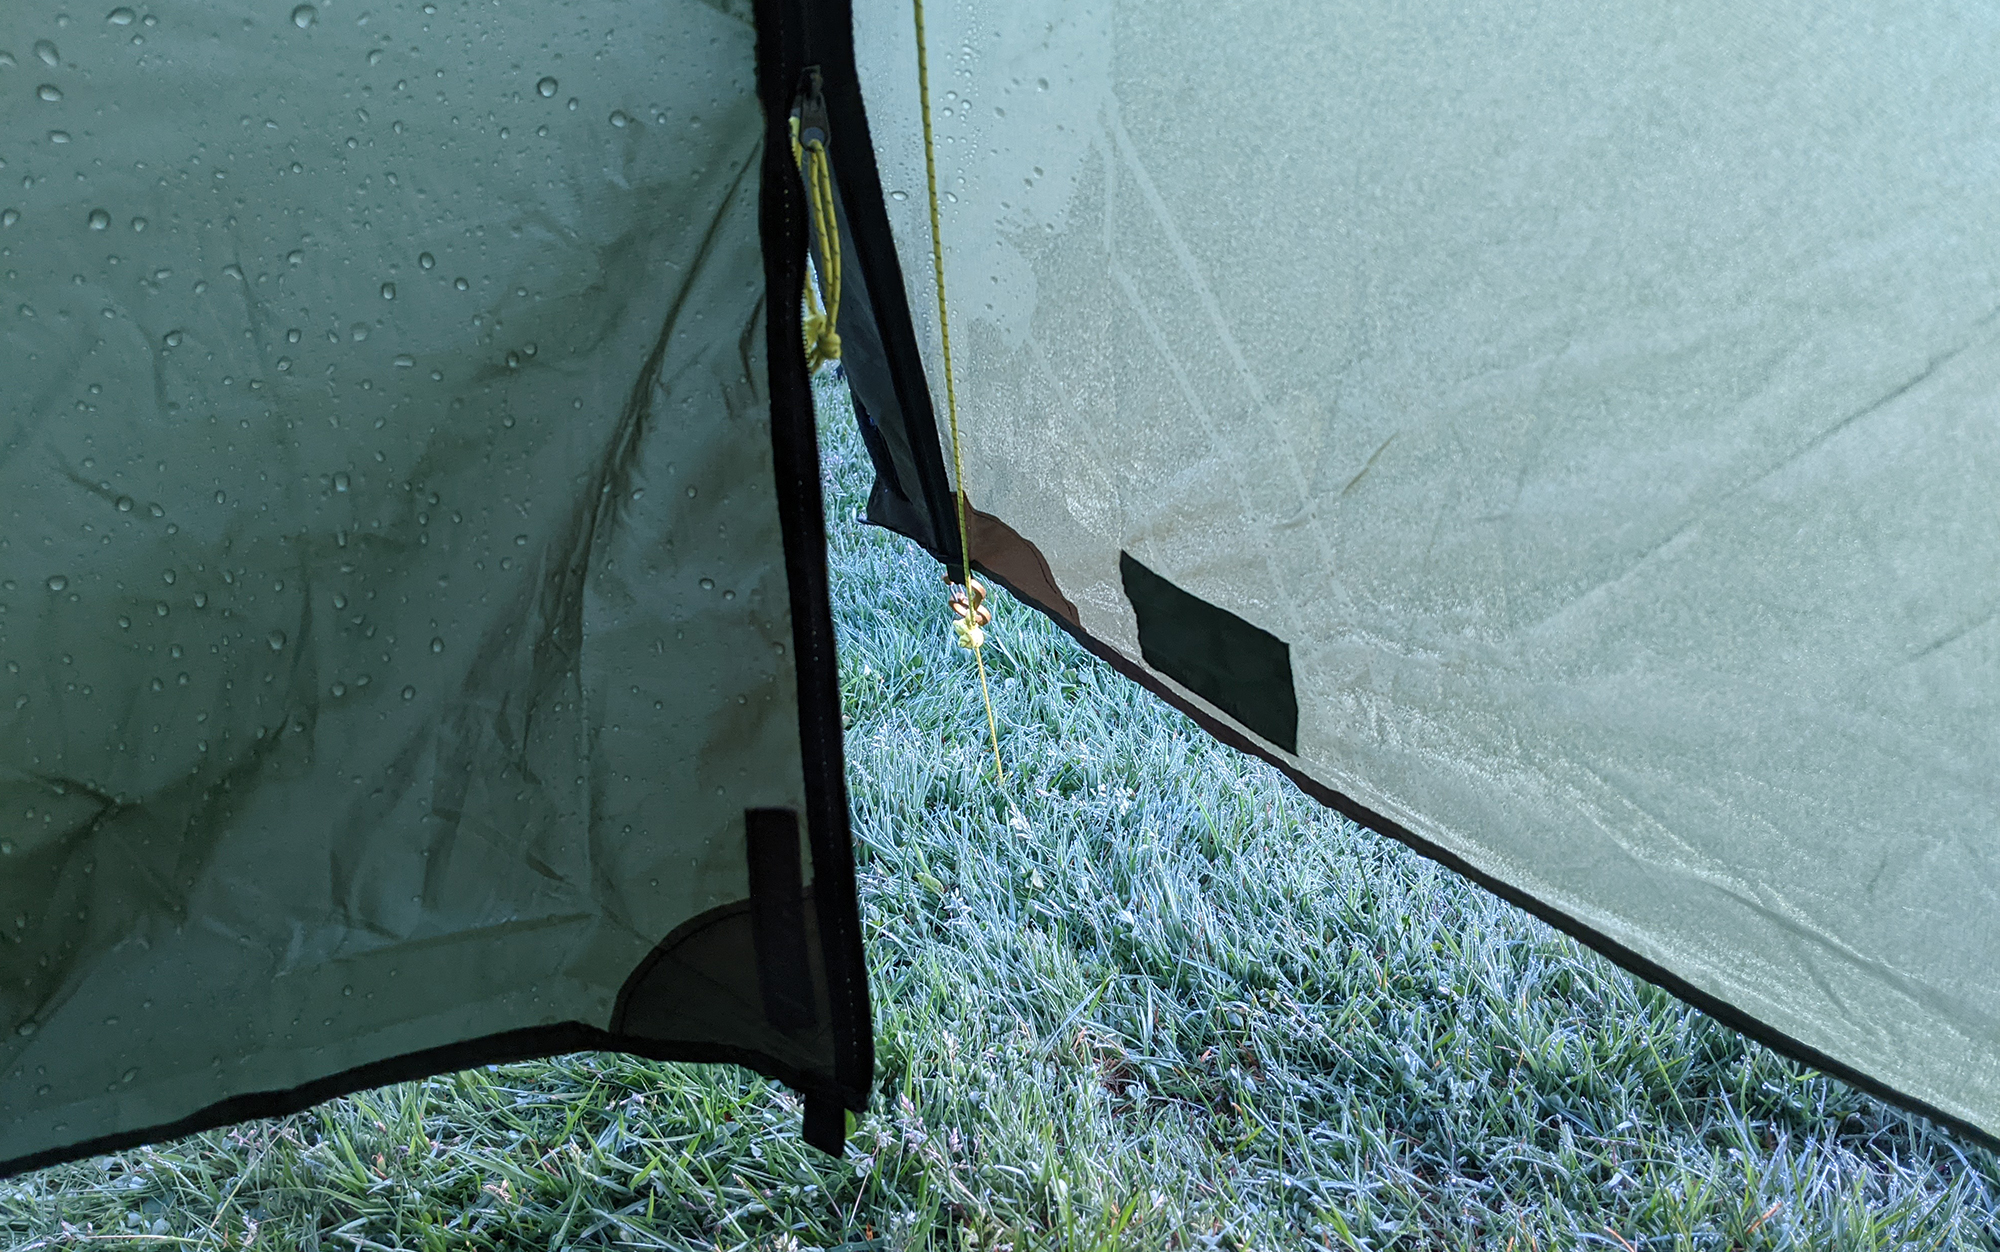 Being able to adjust the guyline of the tent door while still wrapped up in your sleeping bag is a game changer.